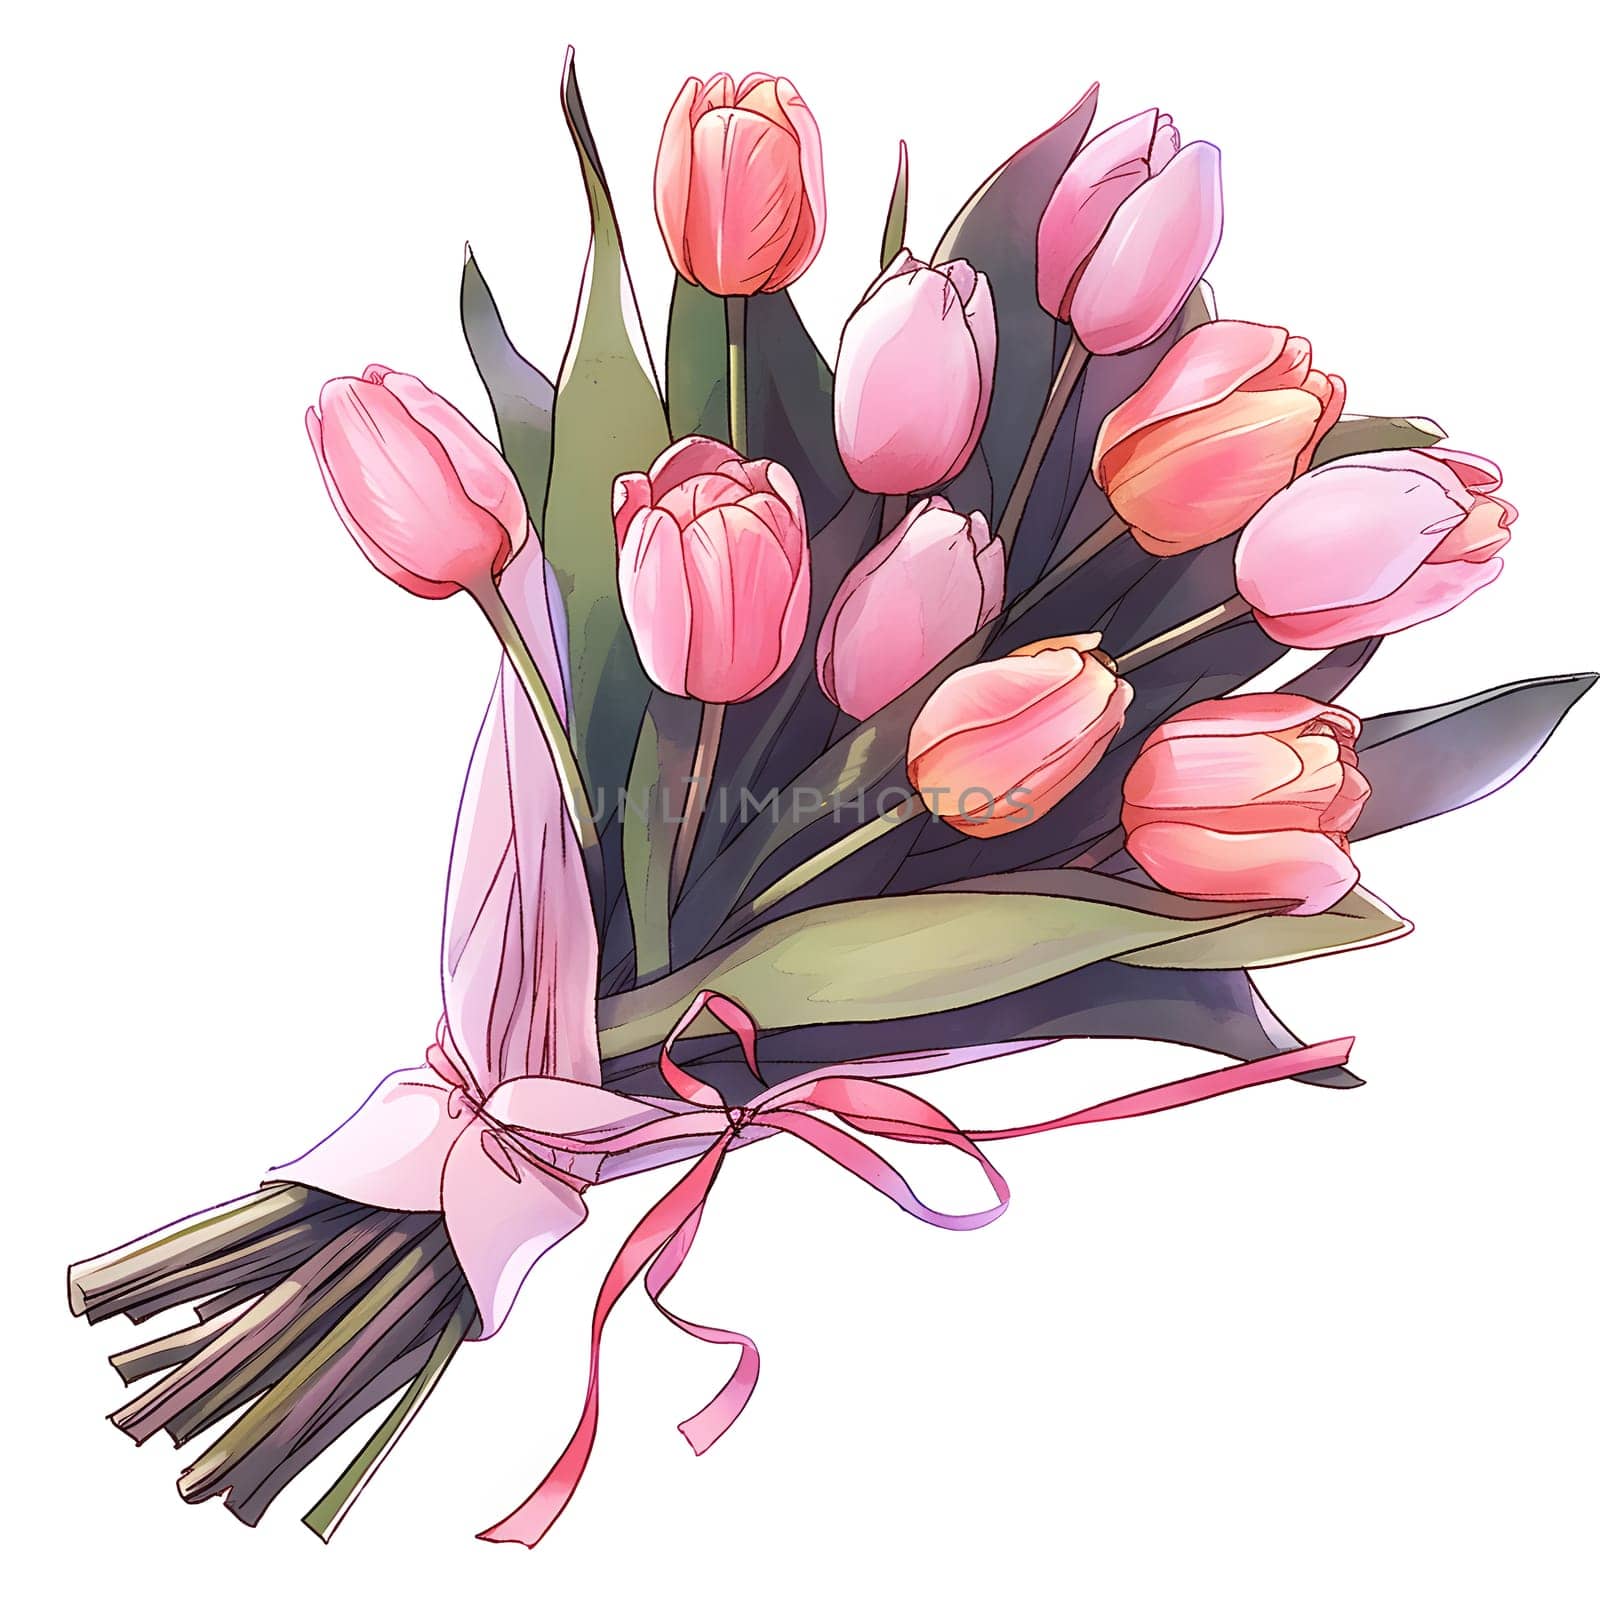 A bouquet of magenta tulips with a matching ribbon by Nadtochiy